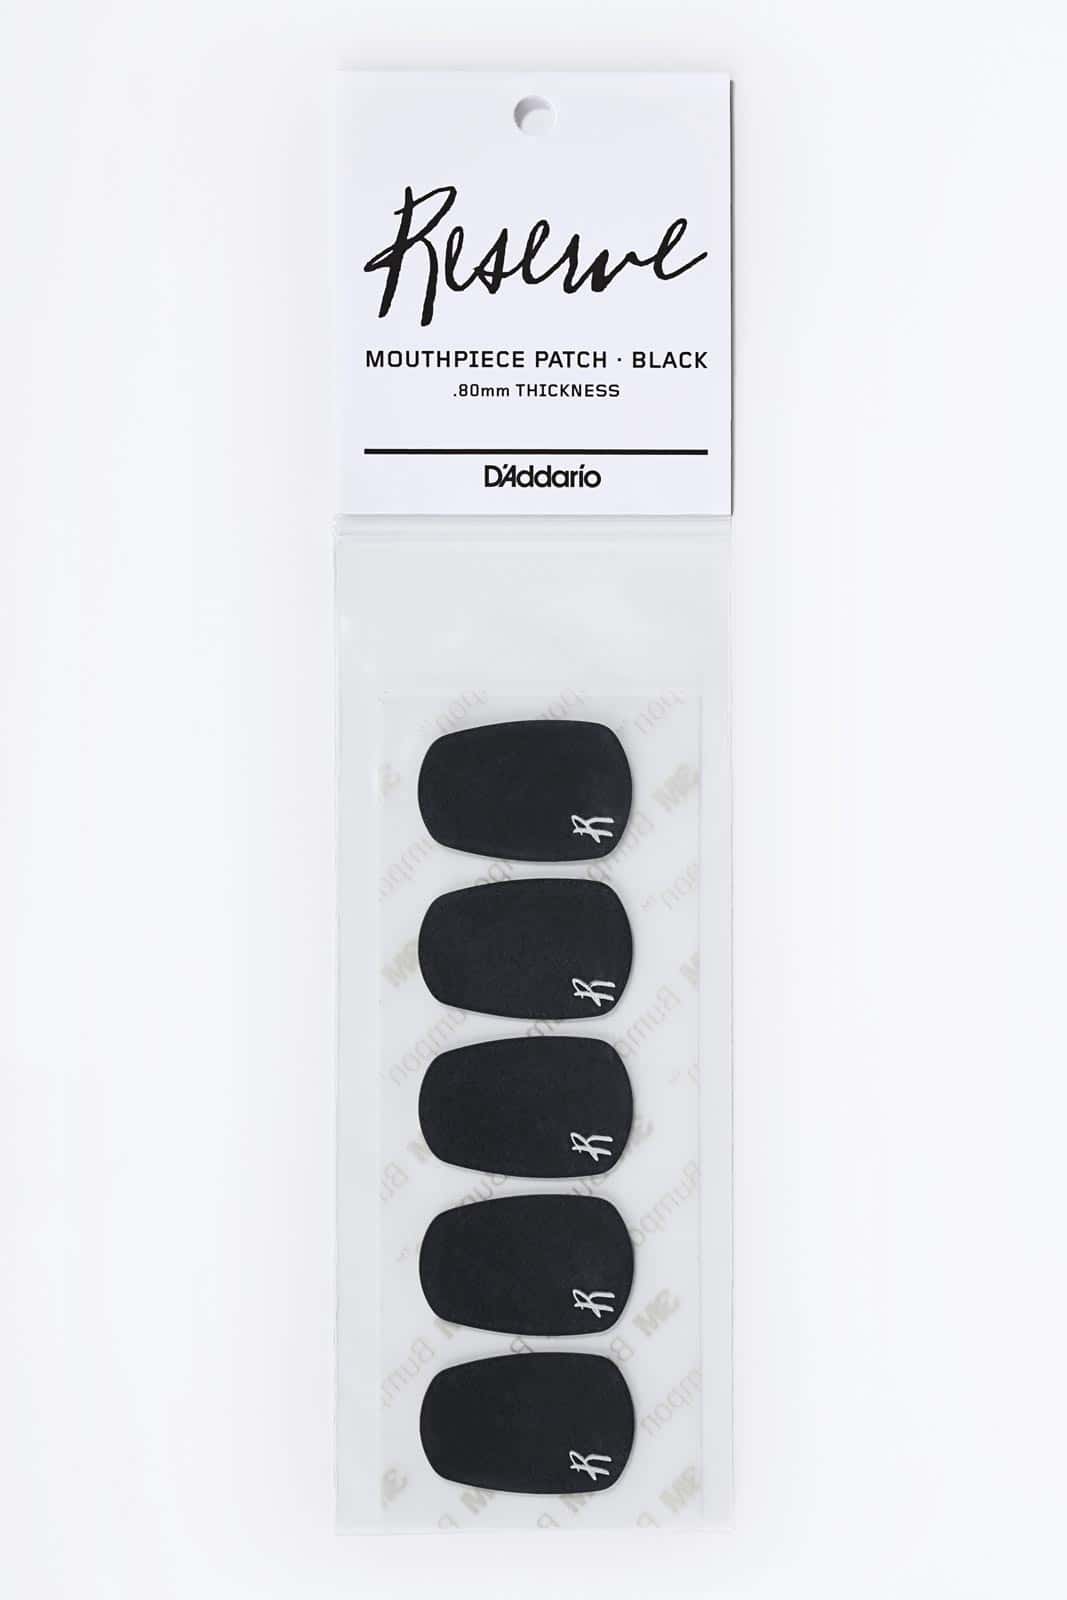 D'ADDARIO - RICO RESERVE MOUTHPIECE PATCH BLACK 5 PACK